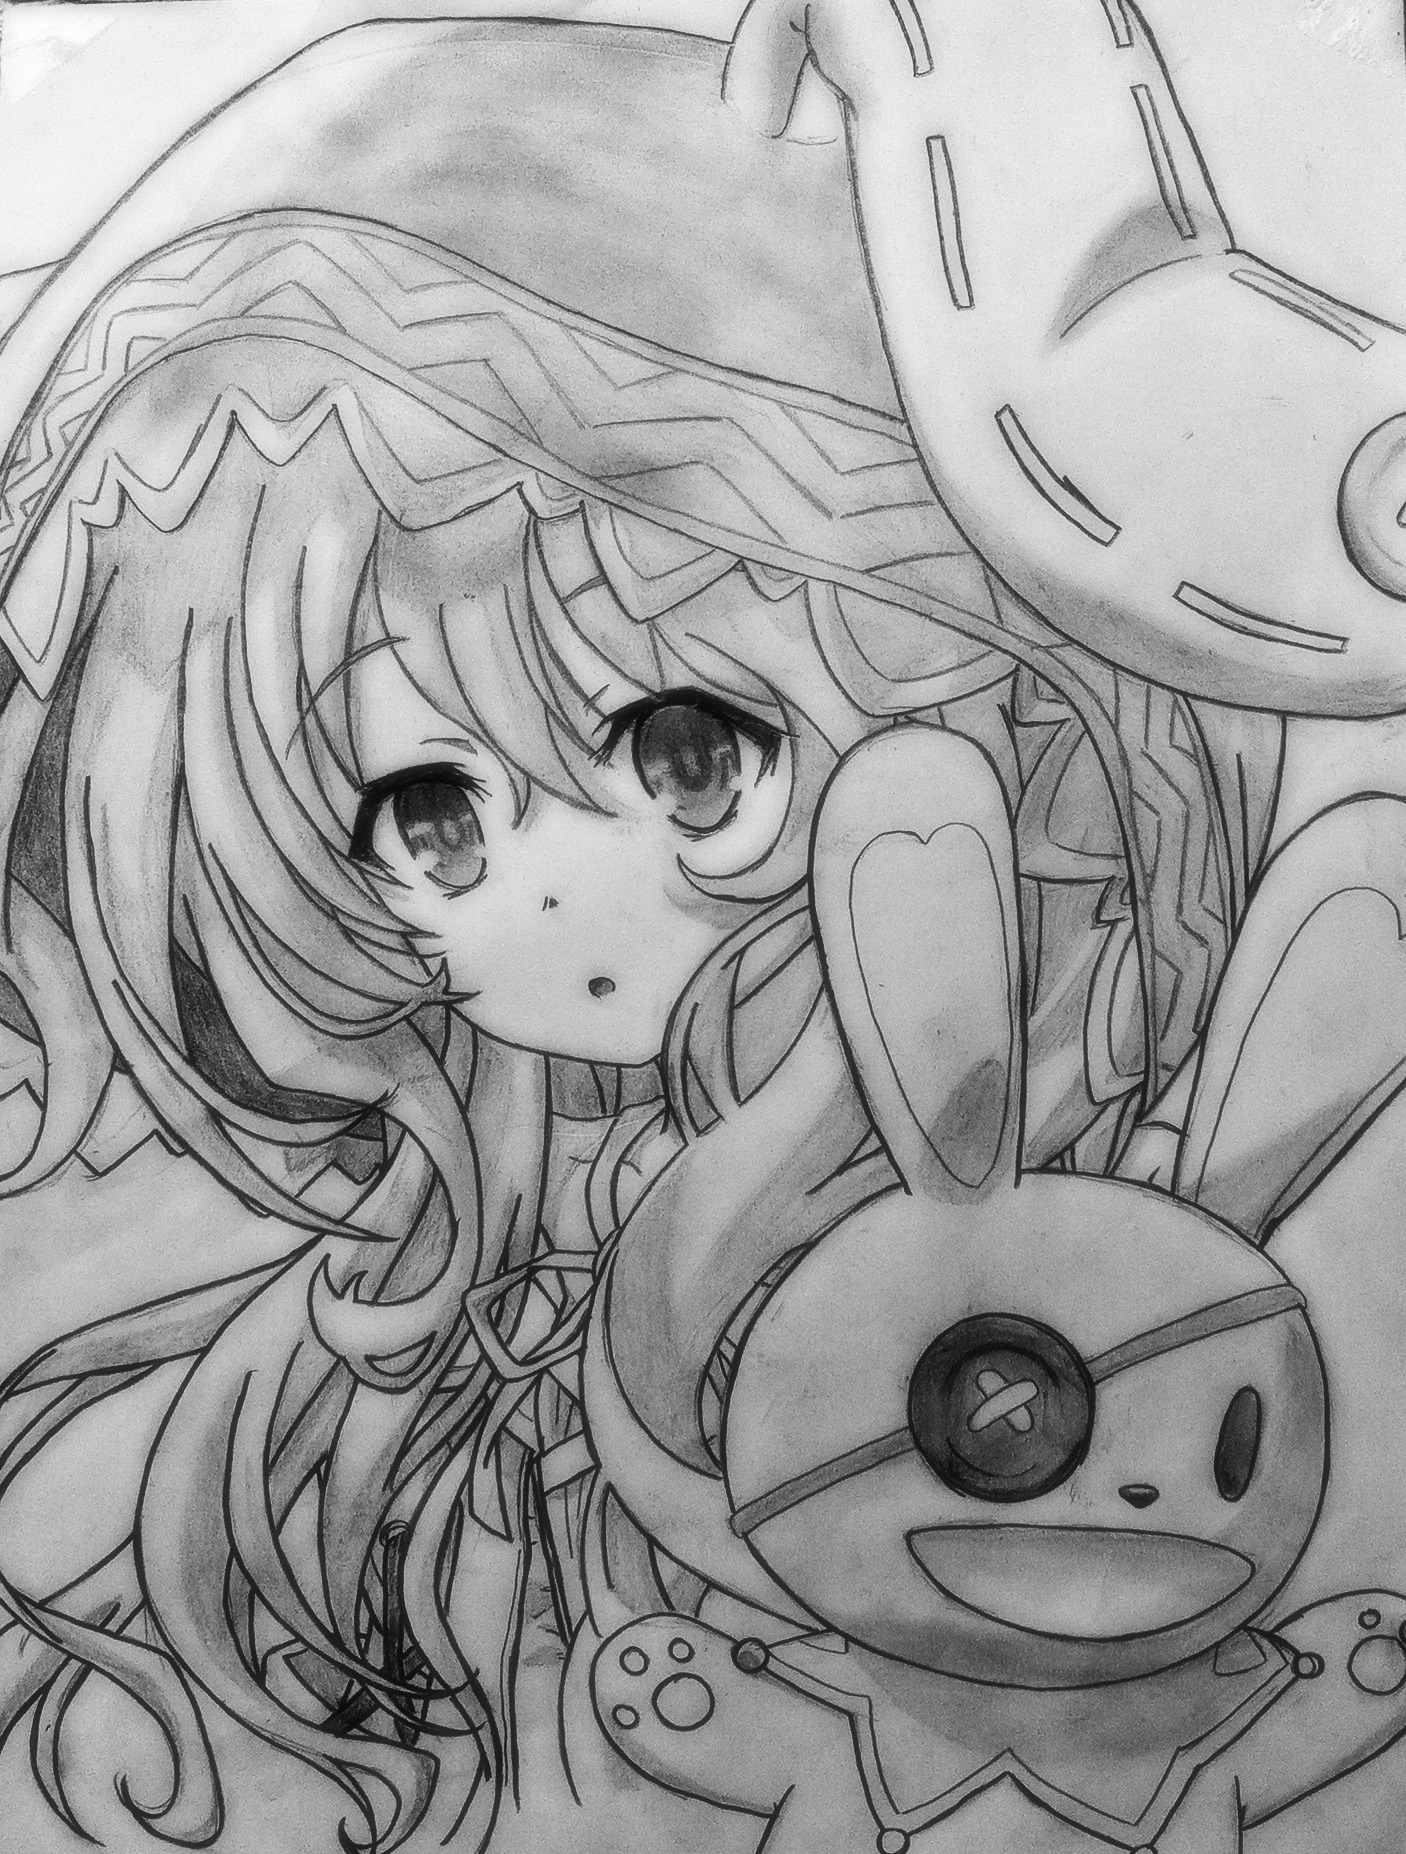 Yoshino (Date A Live) by FluffyBunny710 on DeviantArt